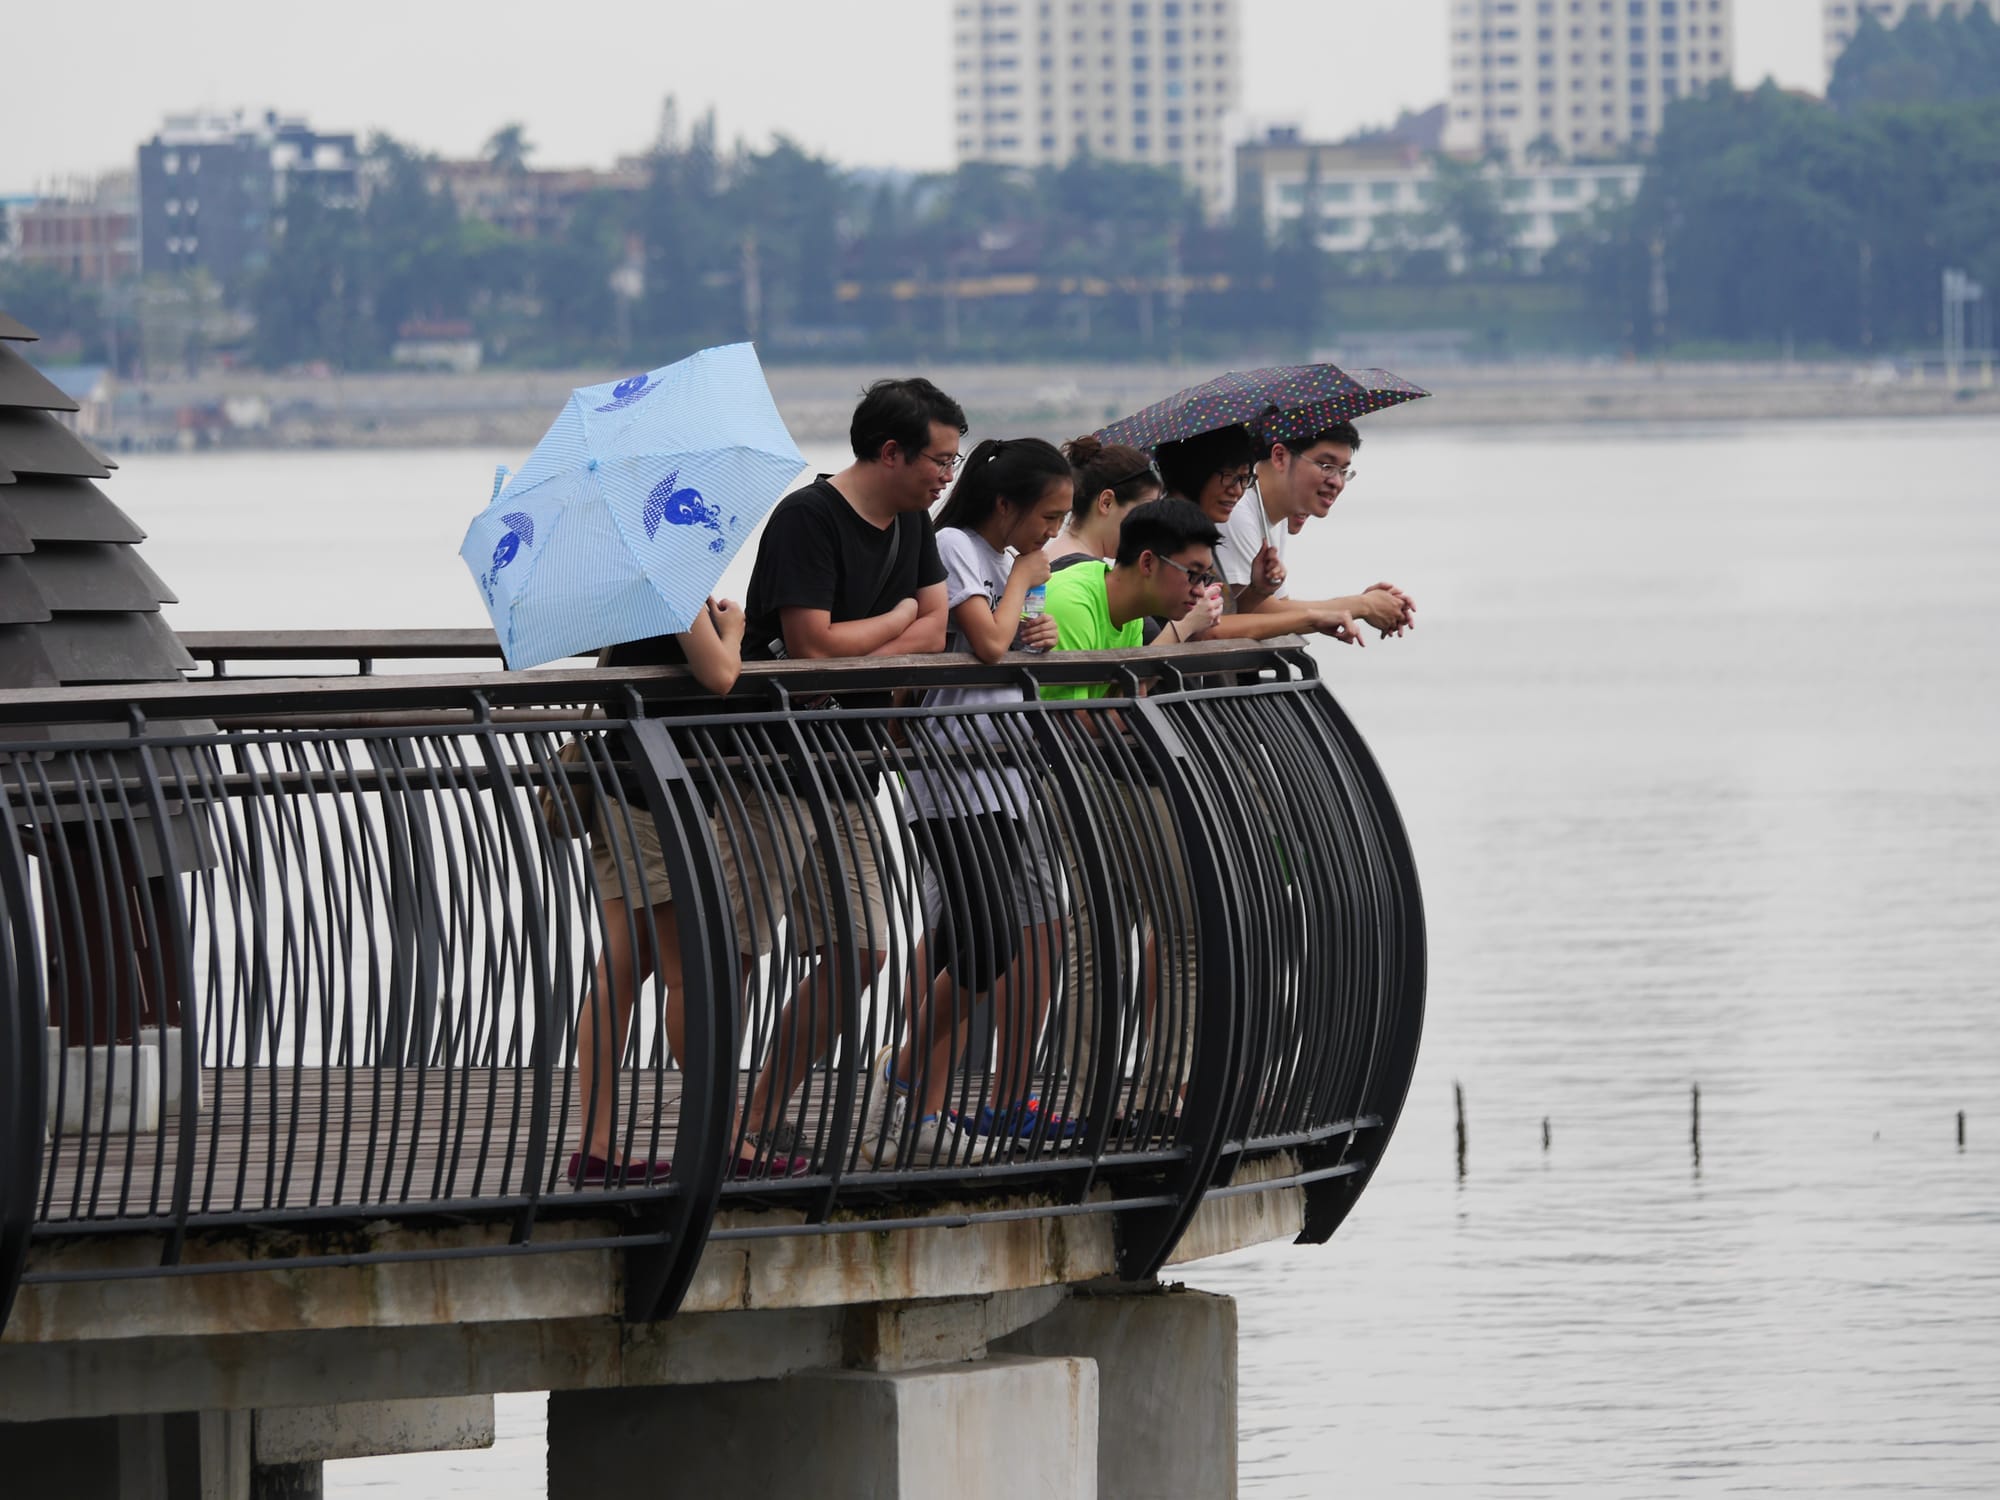 Photo by Author — watching people watching the sea — Sungei Buloh Wetland Reserve, Singapore